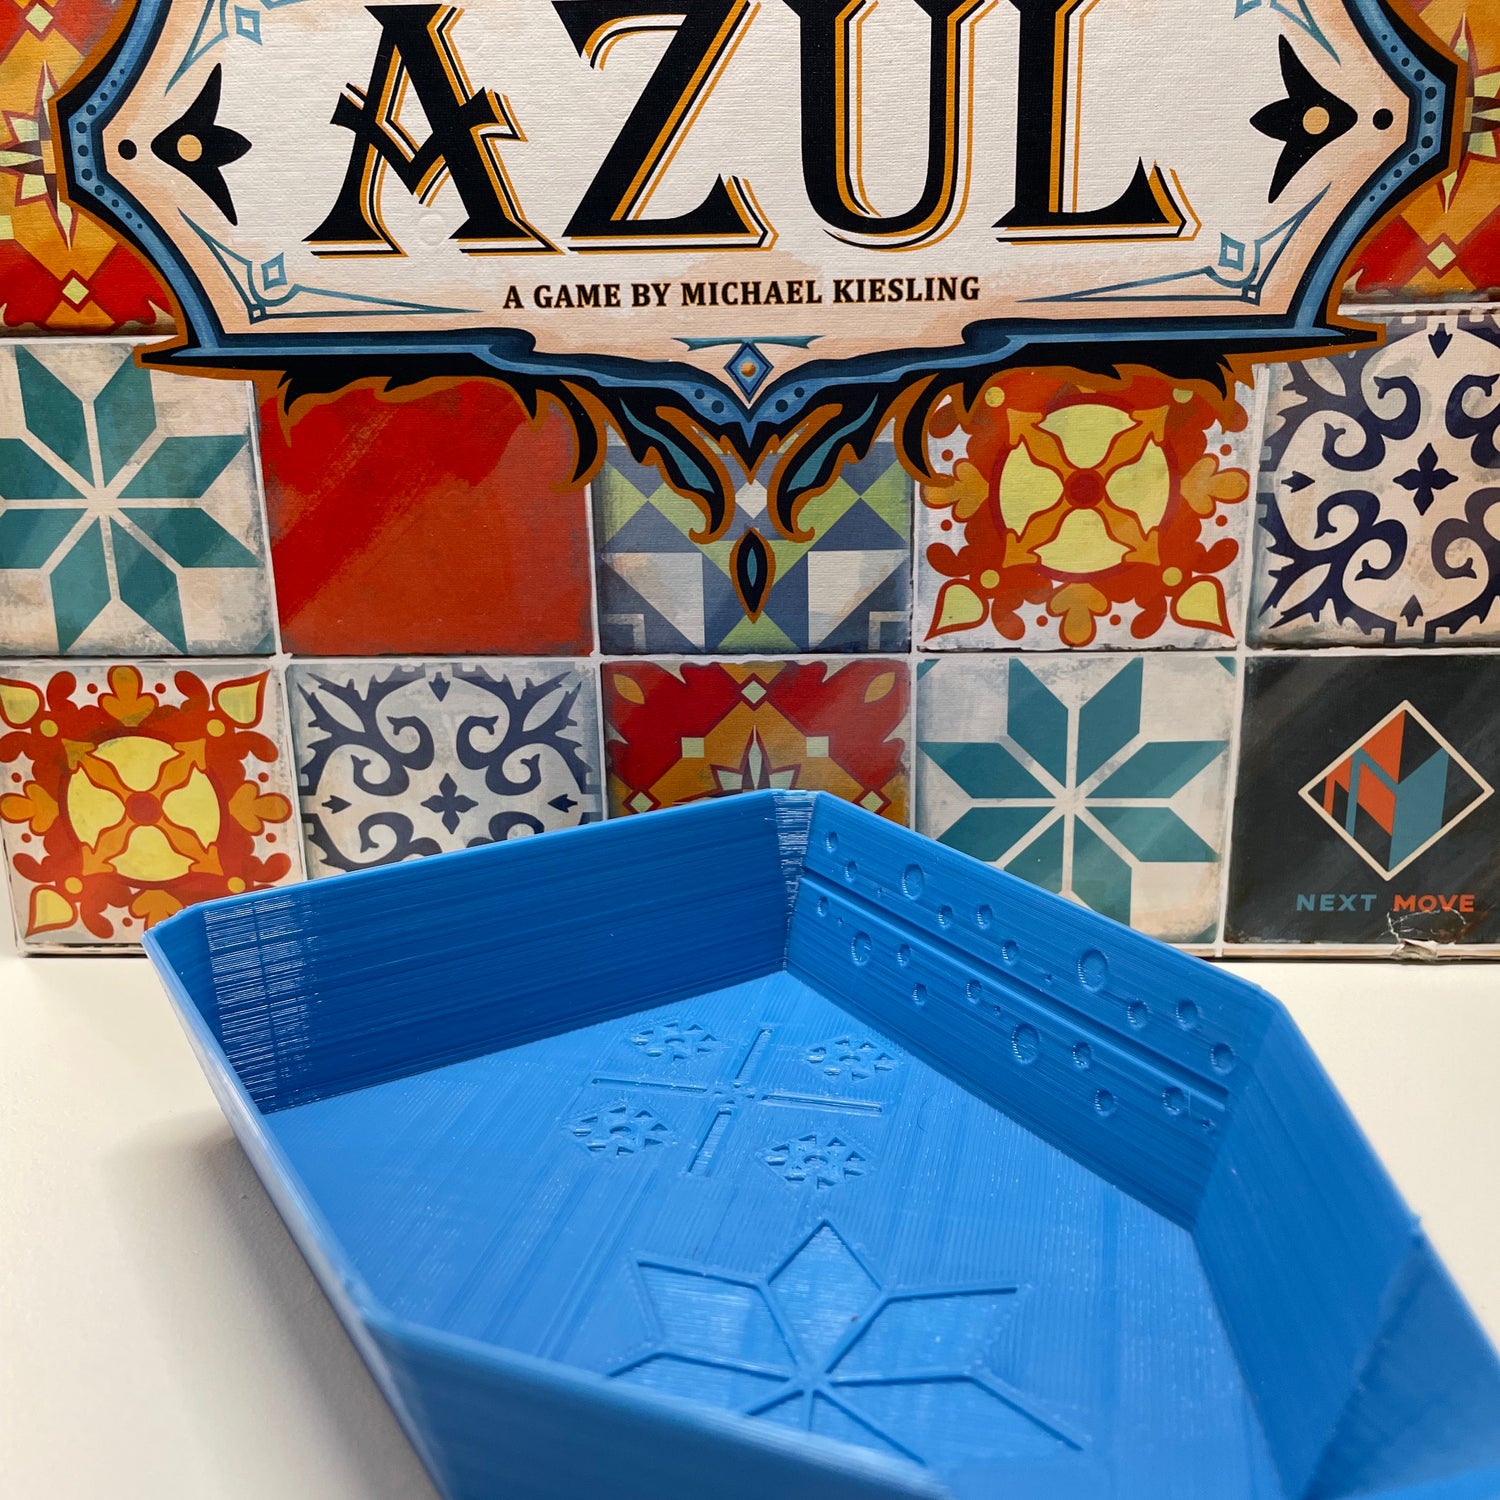 Azul Custom Tile Tray With Azul Board Game Box In Background, Closer To Show Detail 